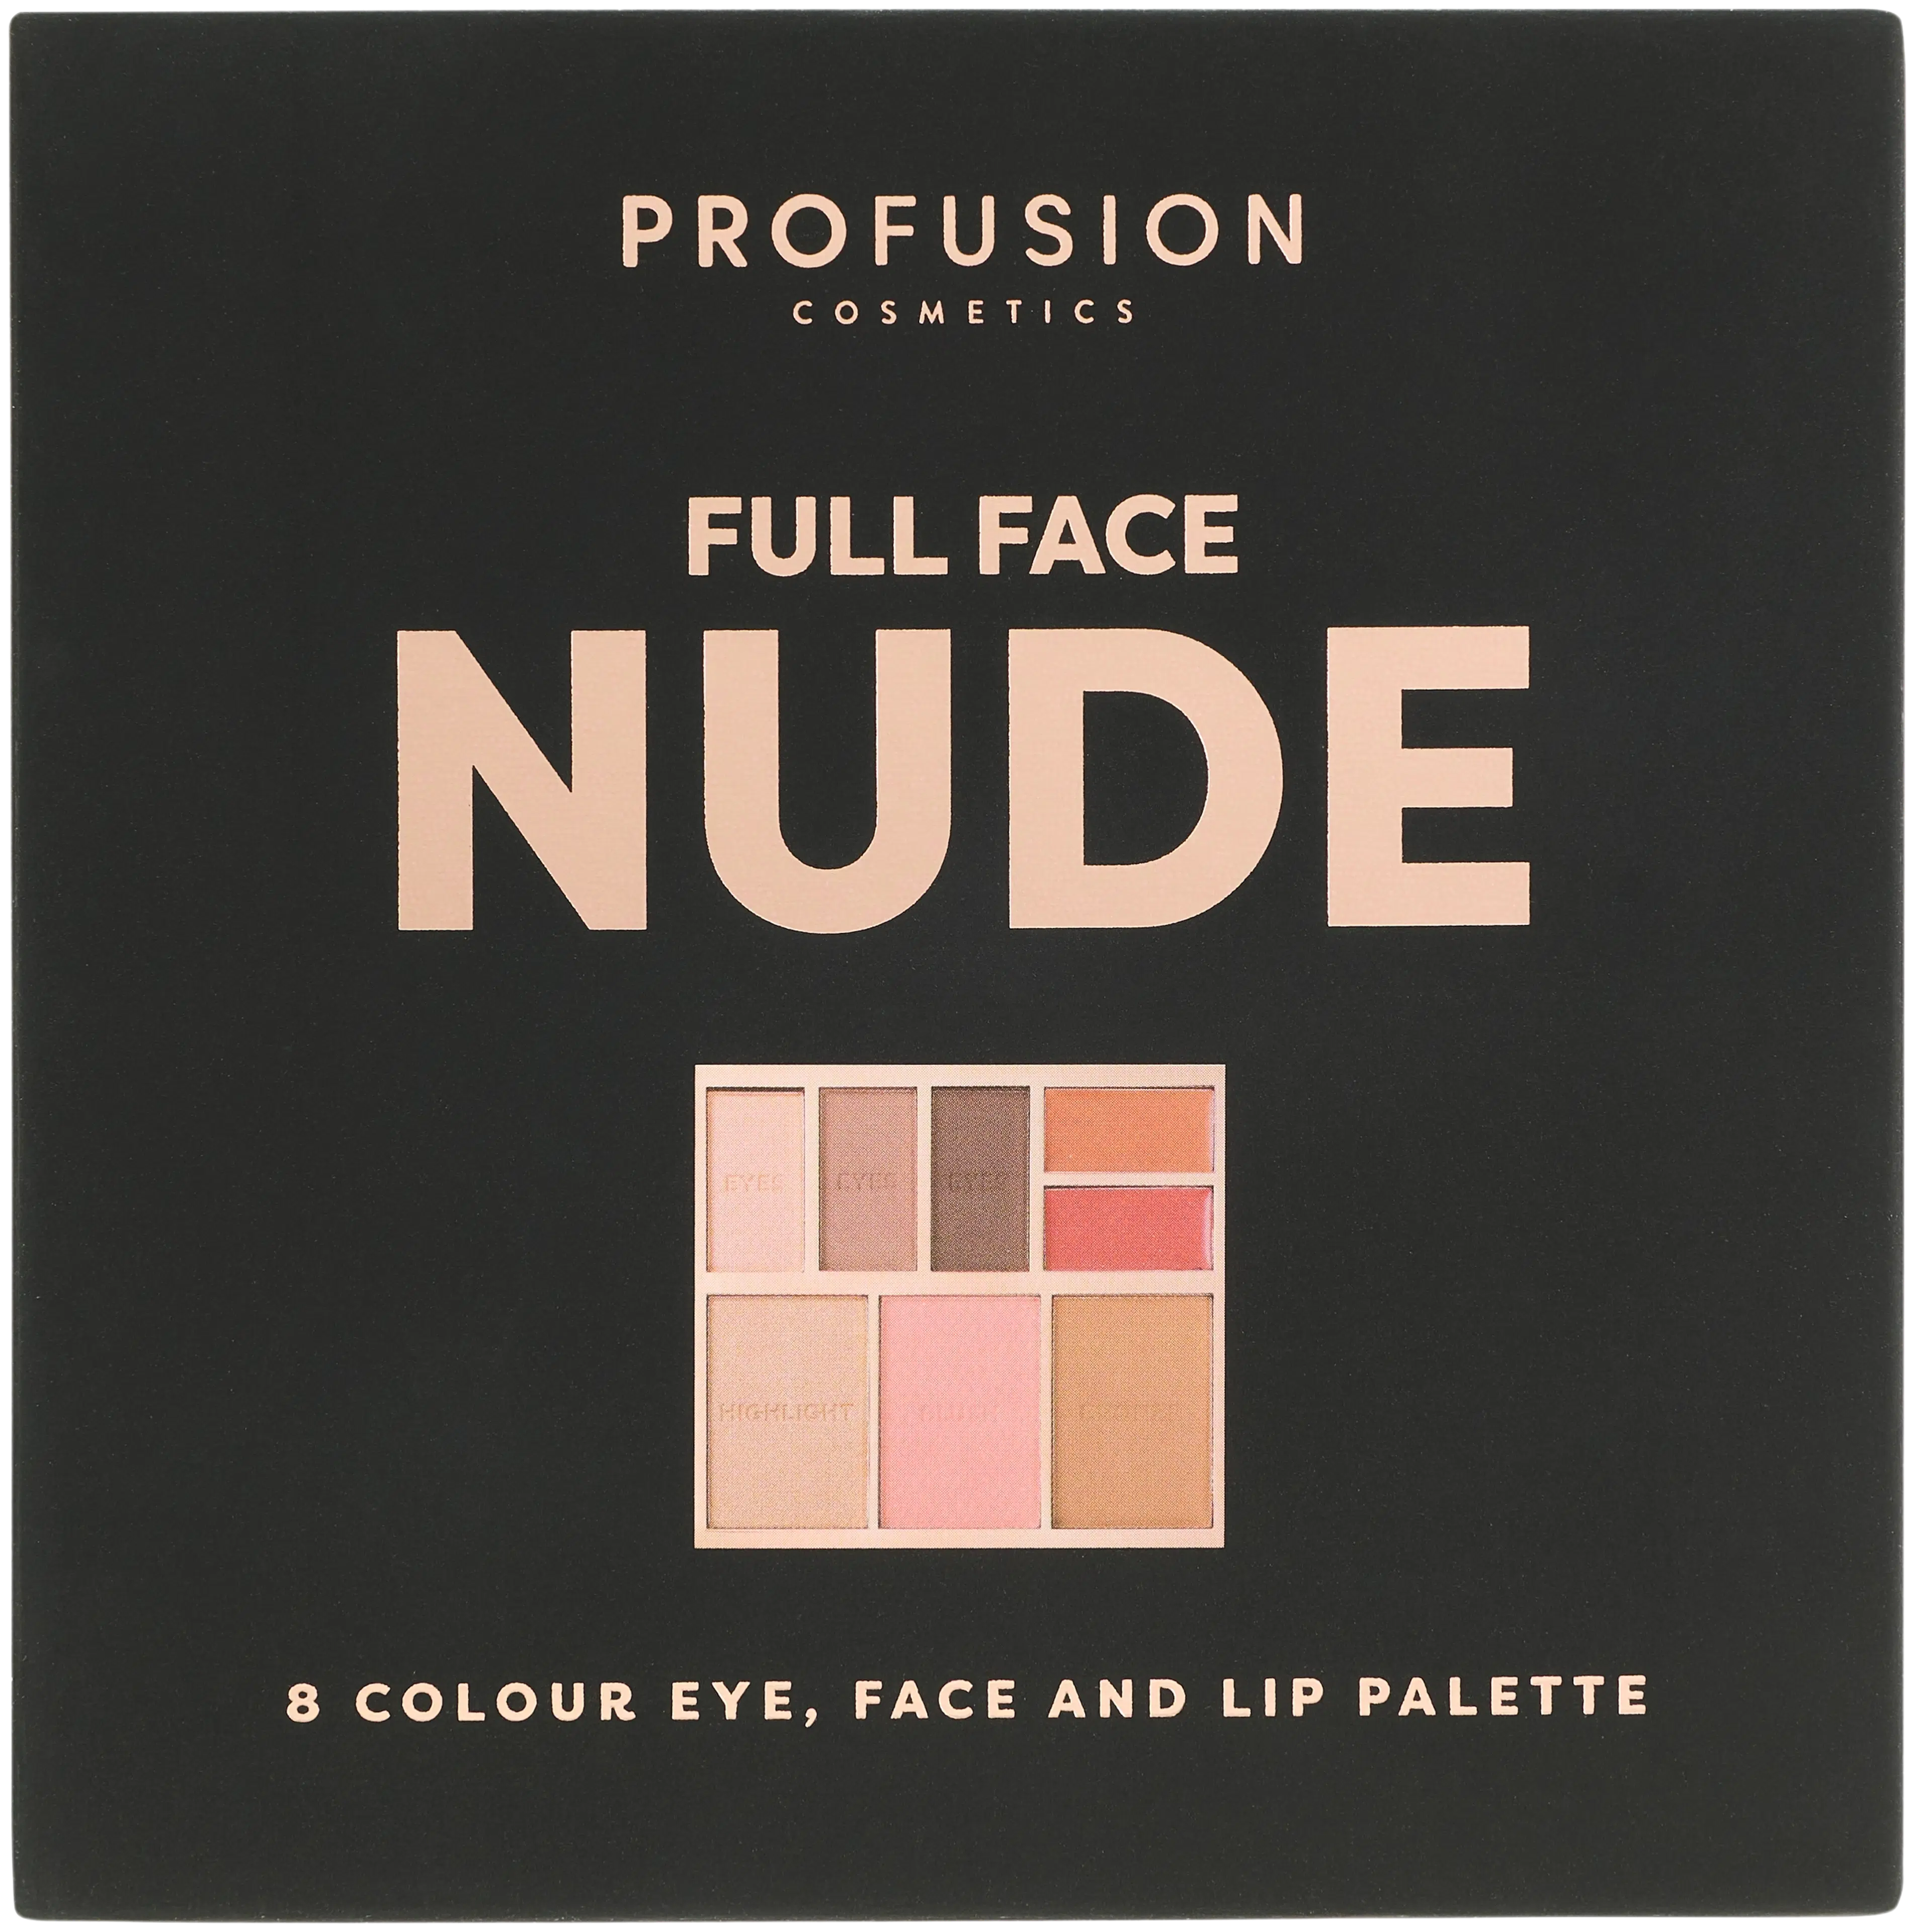 Profusion Cosmetics Full Face 8 Color Eye, Face and Lip Palette meikkipaletti 22,1 g